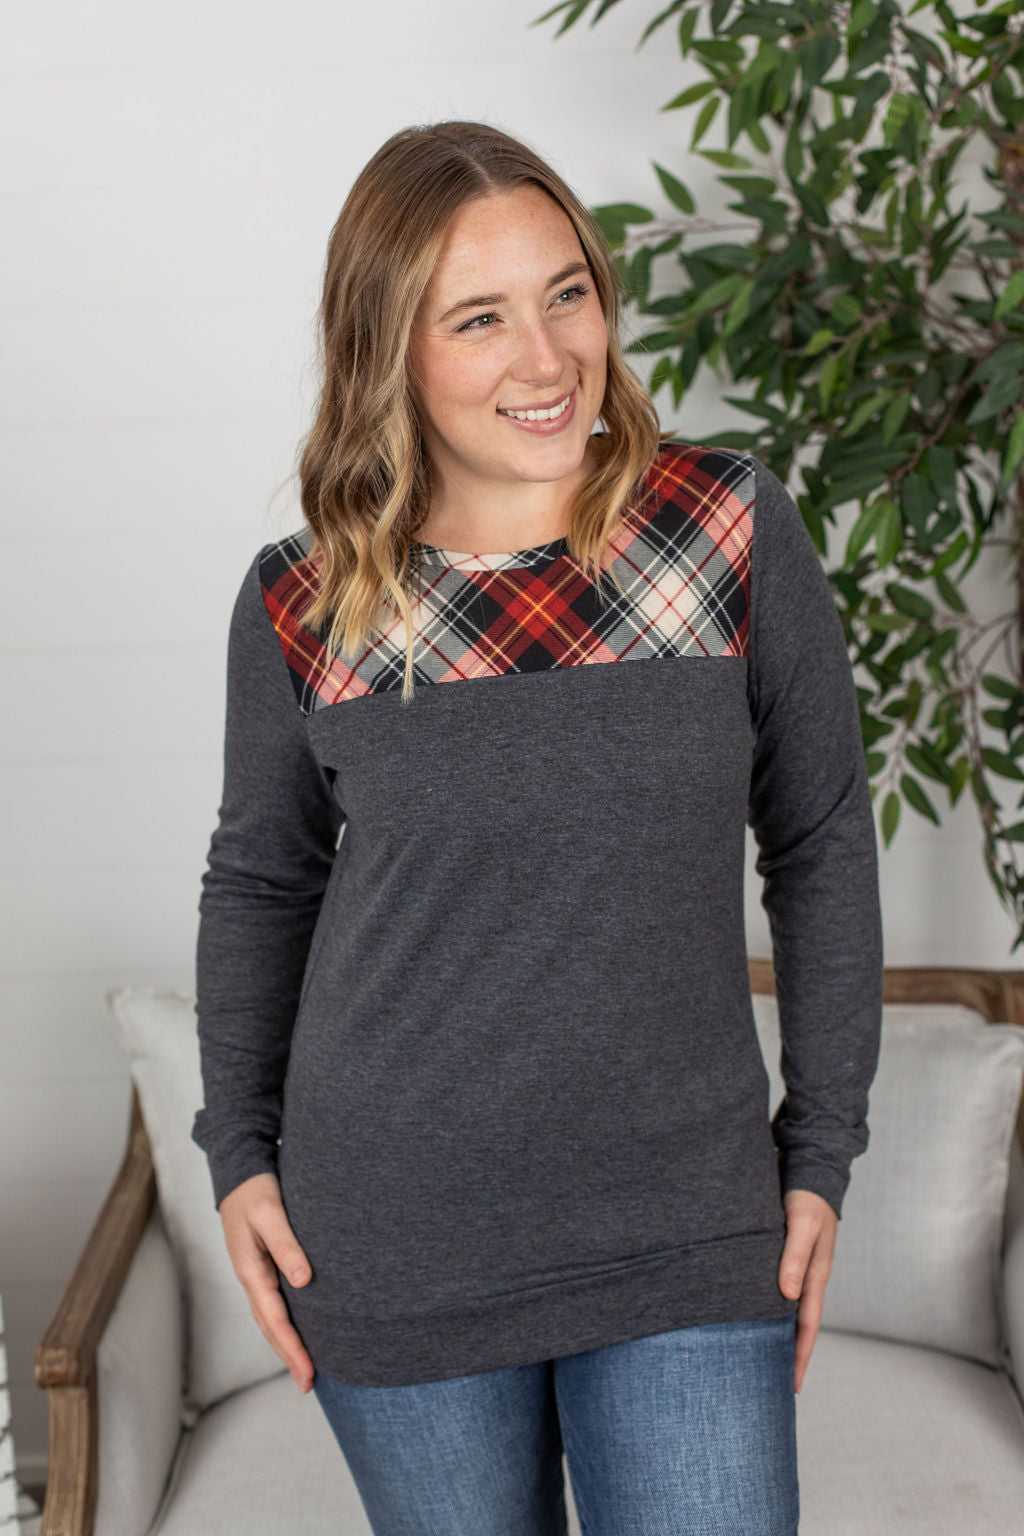 Michelle Mae Abby Accent Top - Charcoal and Red Plaid